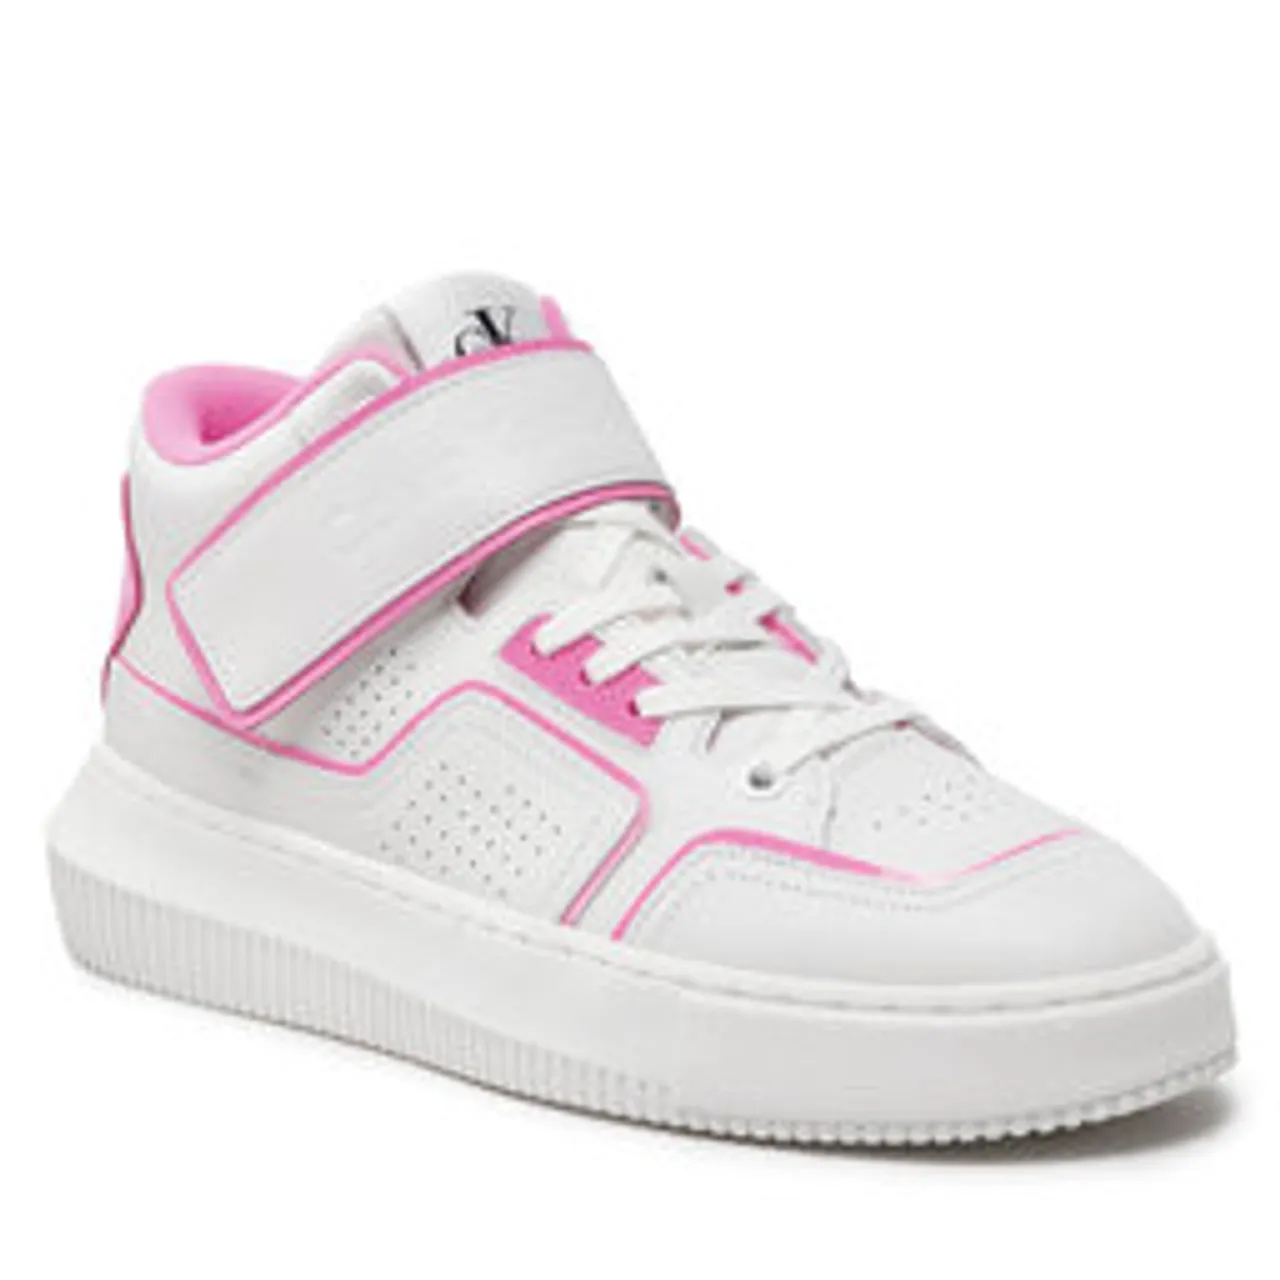 Sneakers Calvin Klein Jeans Chunky Cupsole Laceup Mid YW0YW00691 White/Neon Pink 0LA